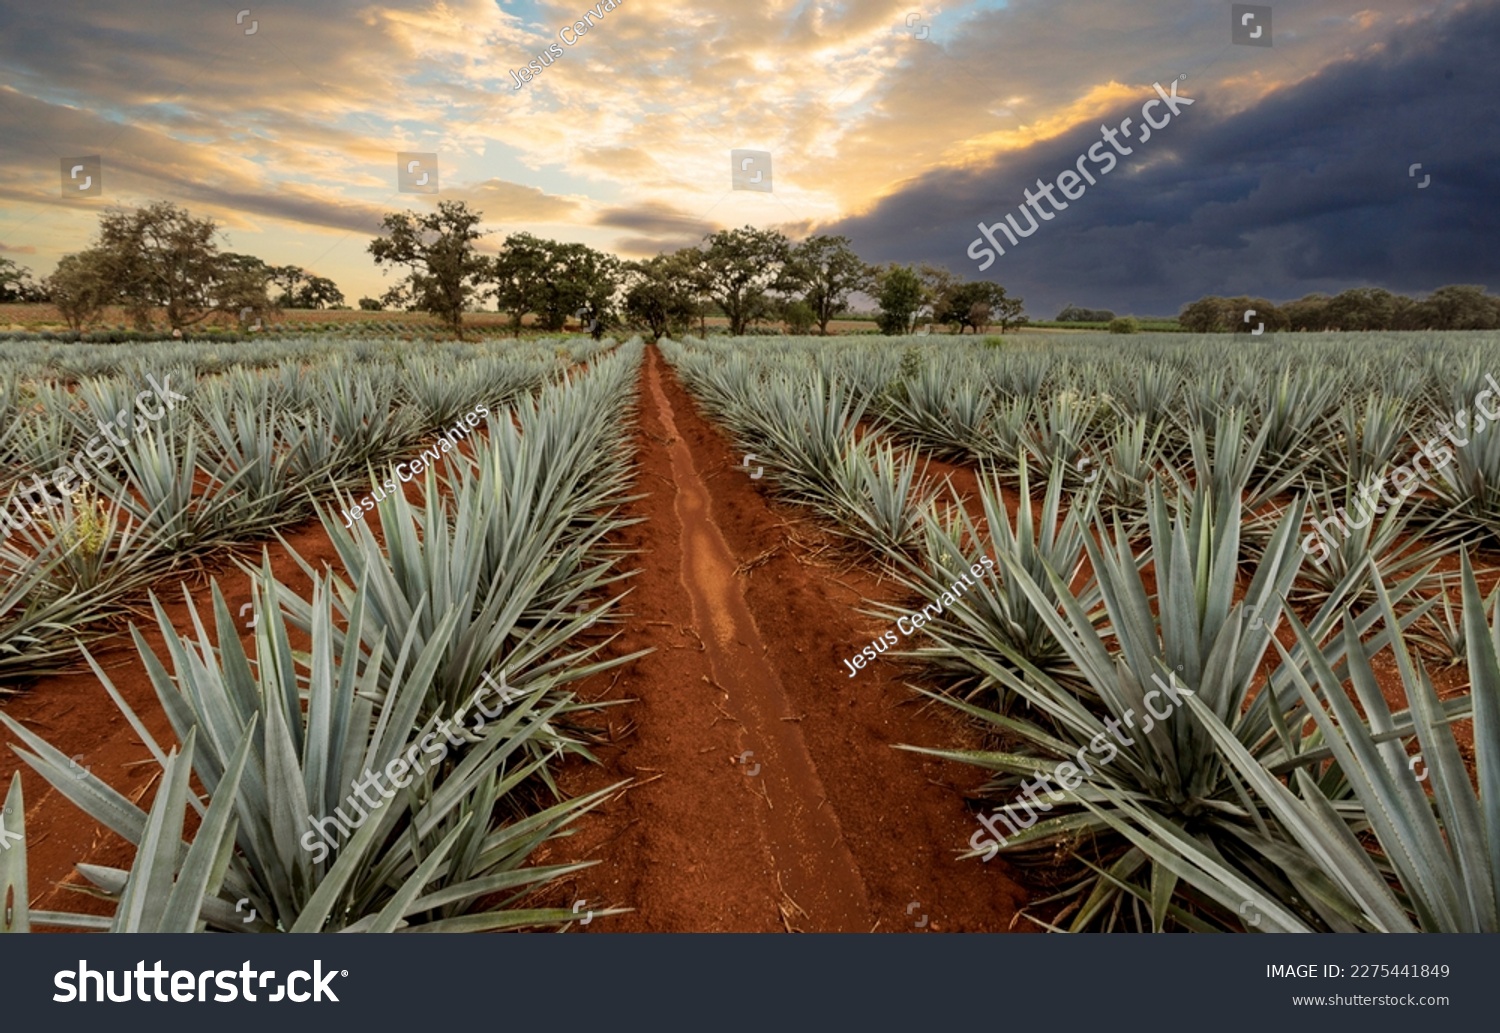 Landscape of agave plants to produce tequila. Mexico. #2275441849